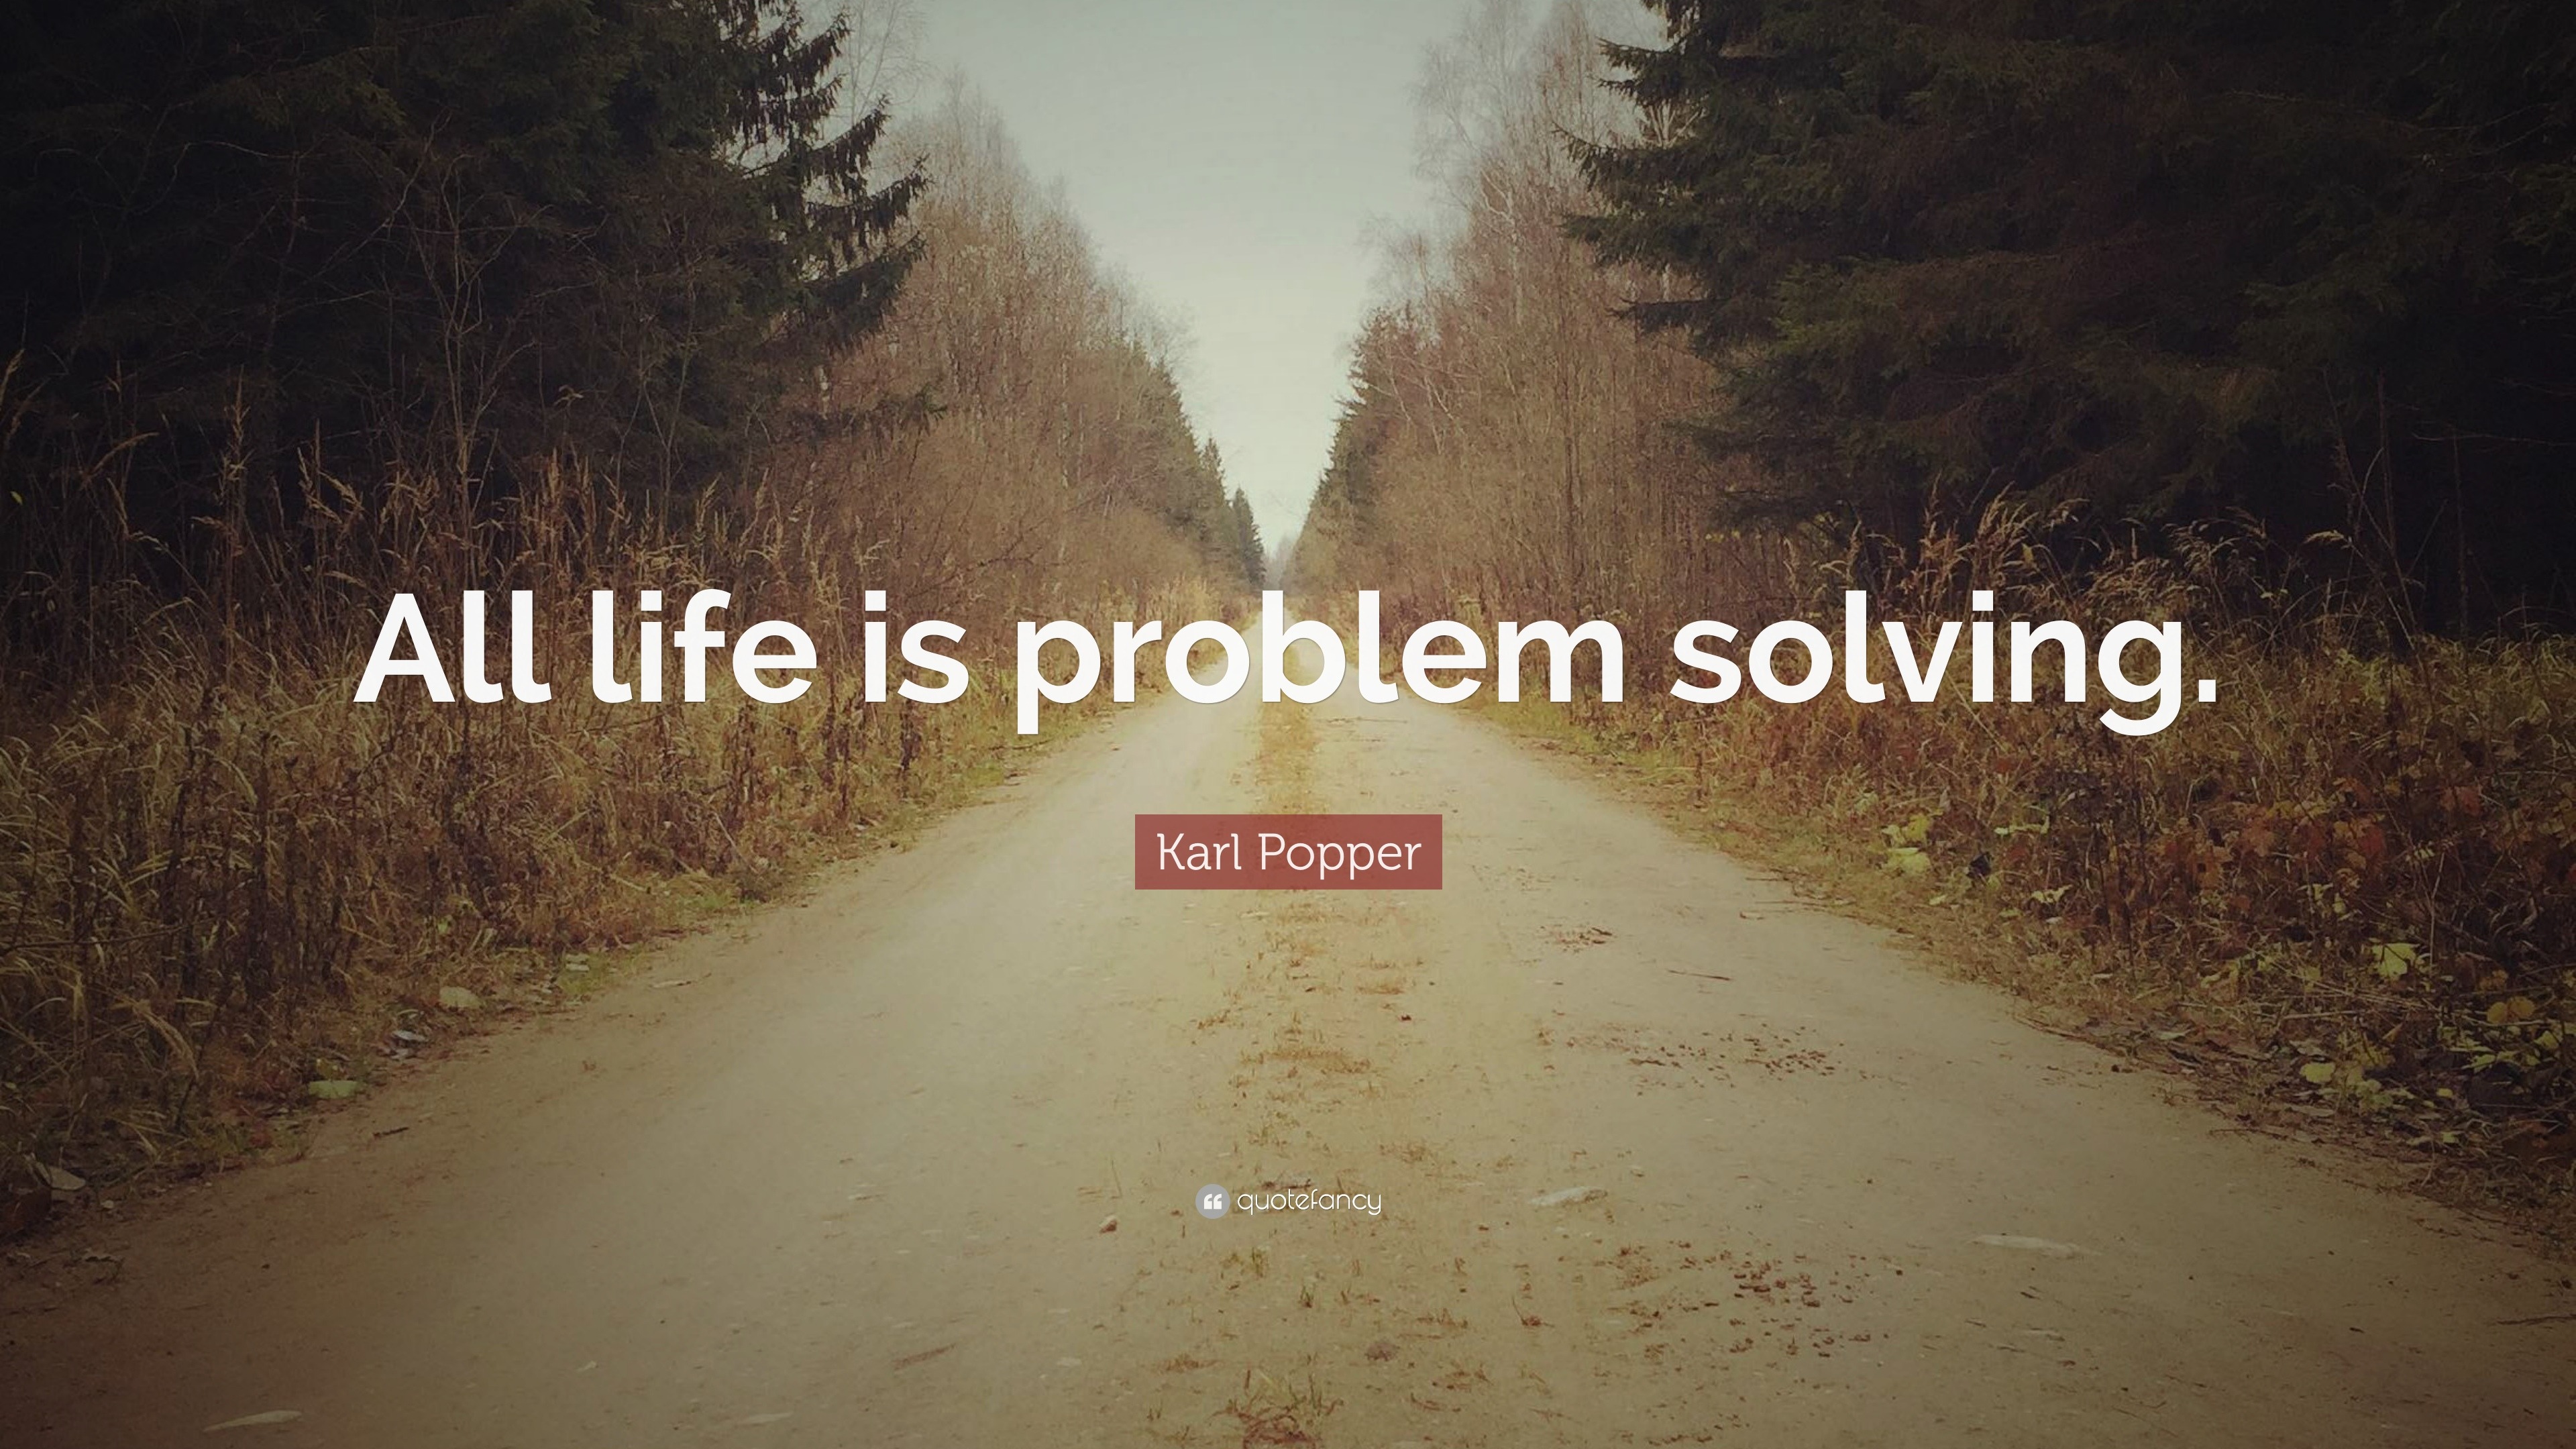 karl popper all life is problem solving